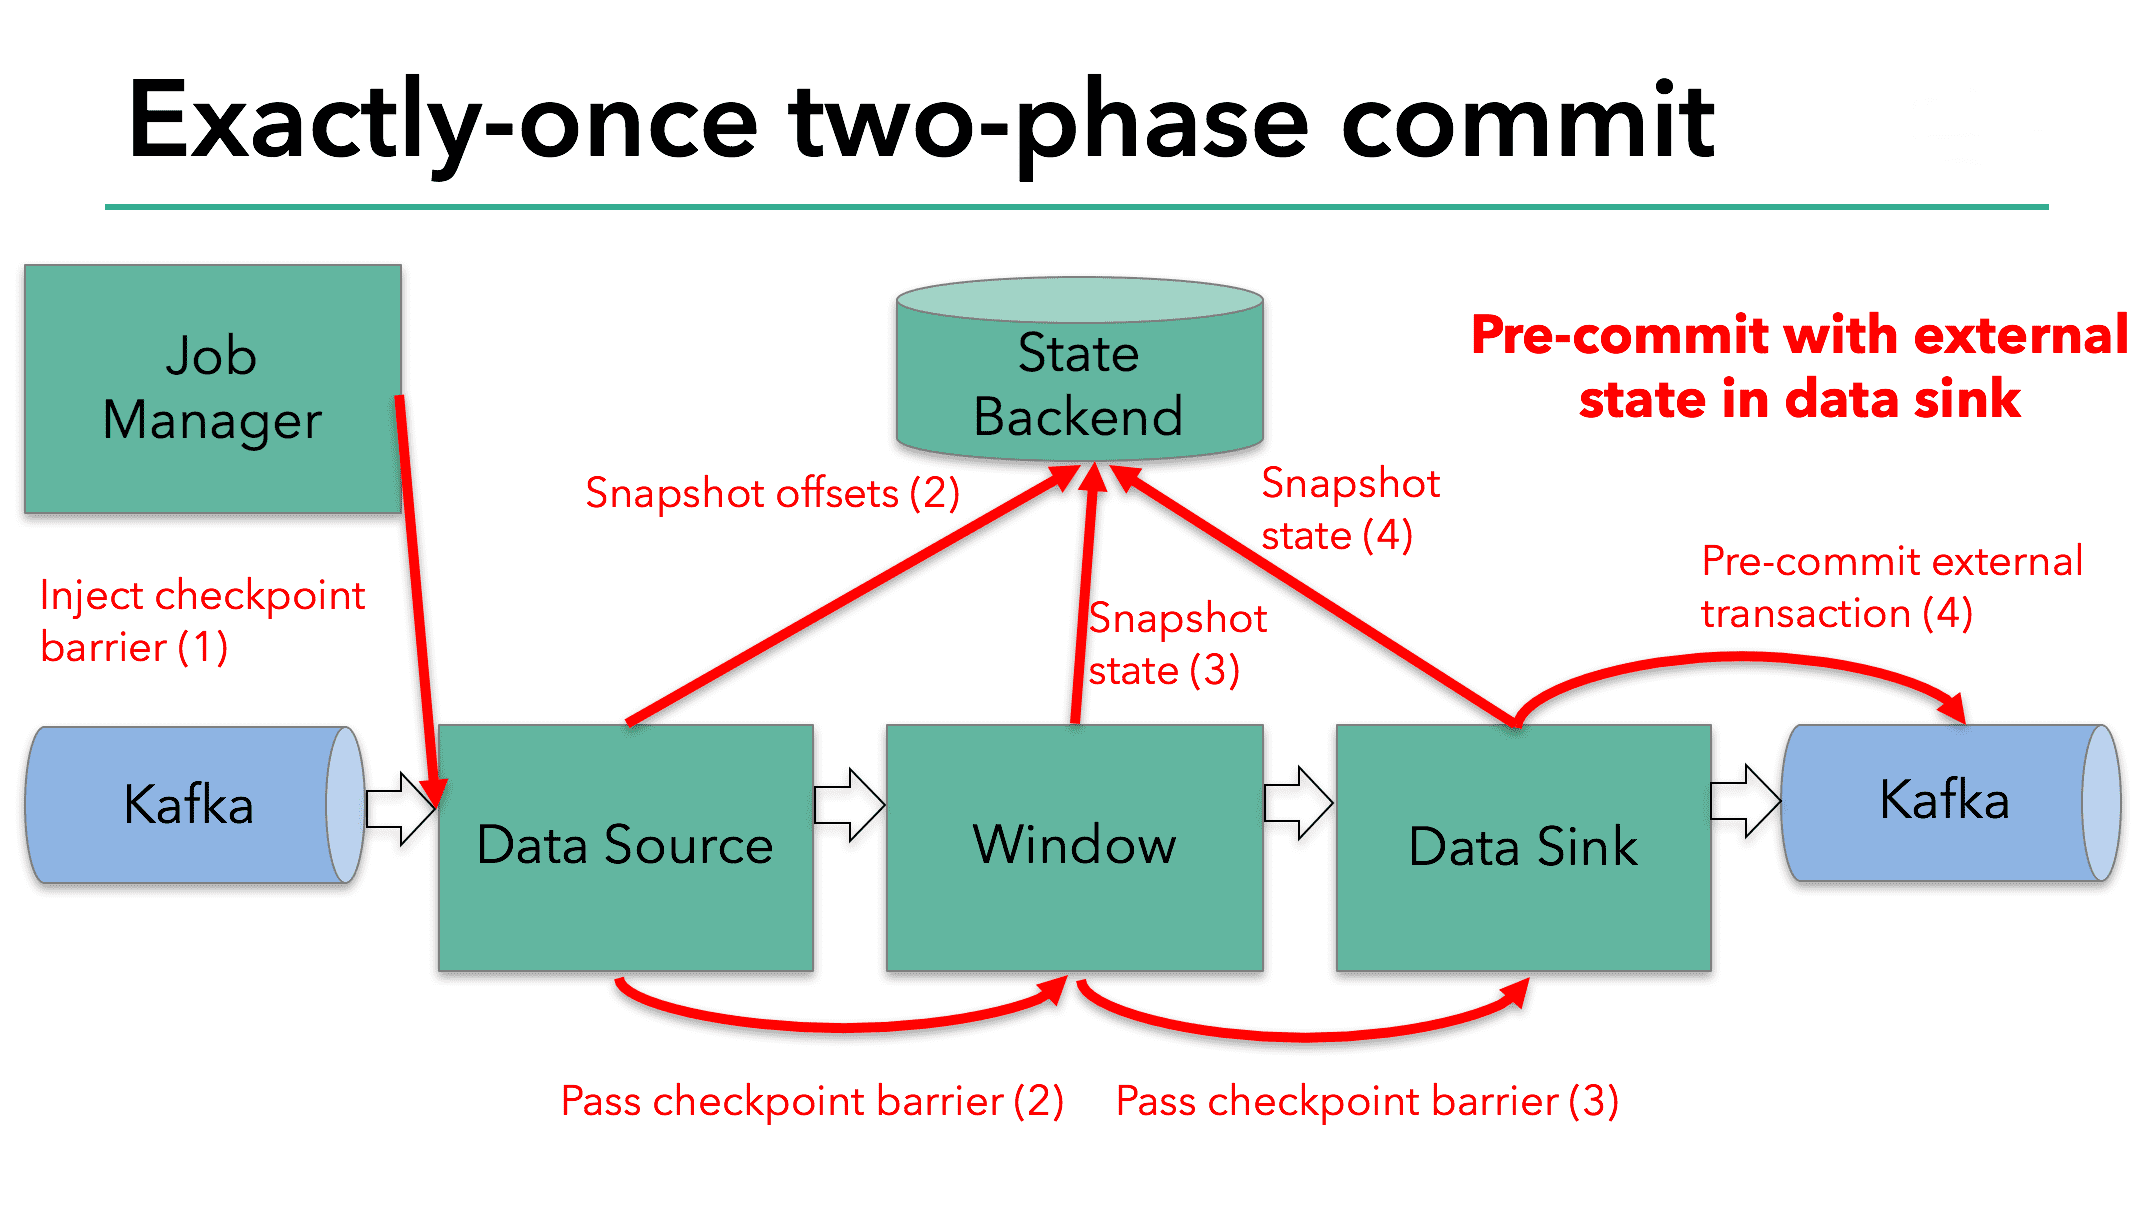 prepare step in the two-phase commit